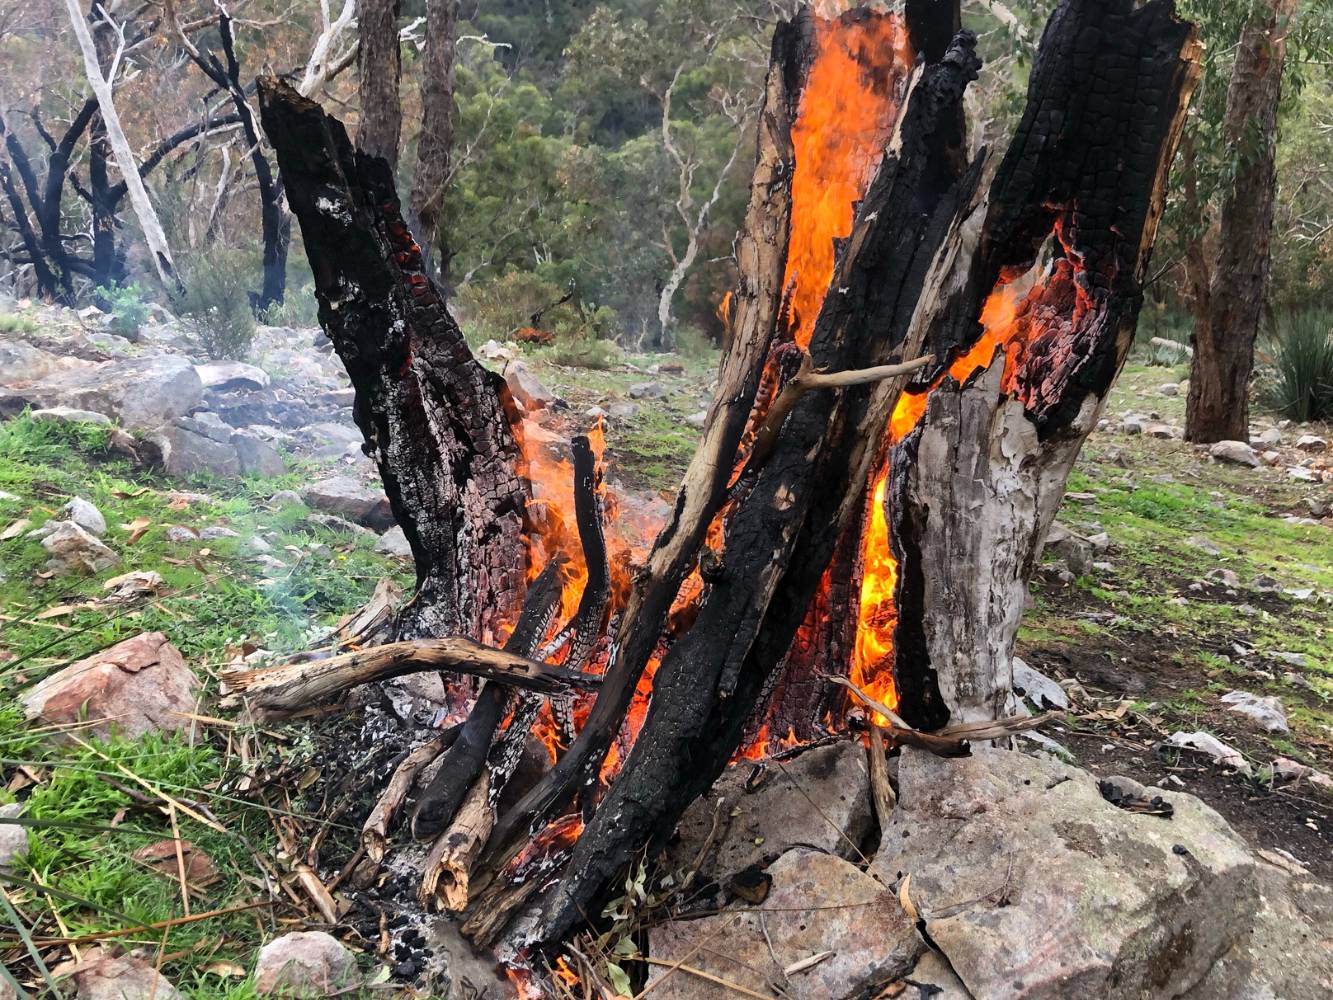 January 2021 bushfire devastated about 5 acres at the rear of the property but bushland restoration well under way